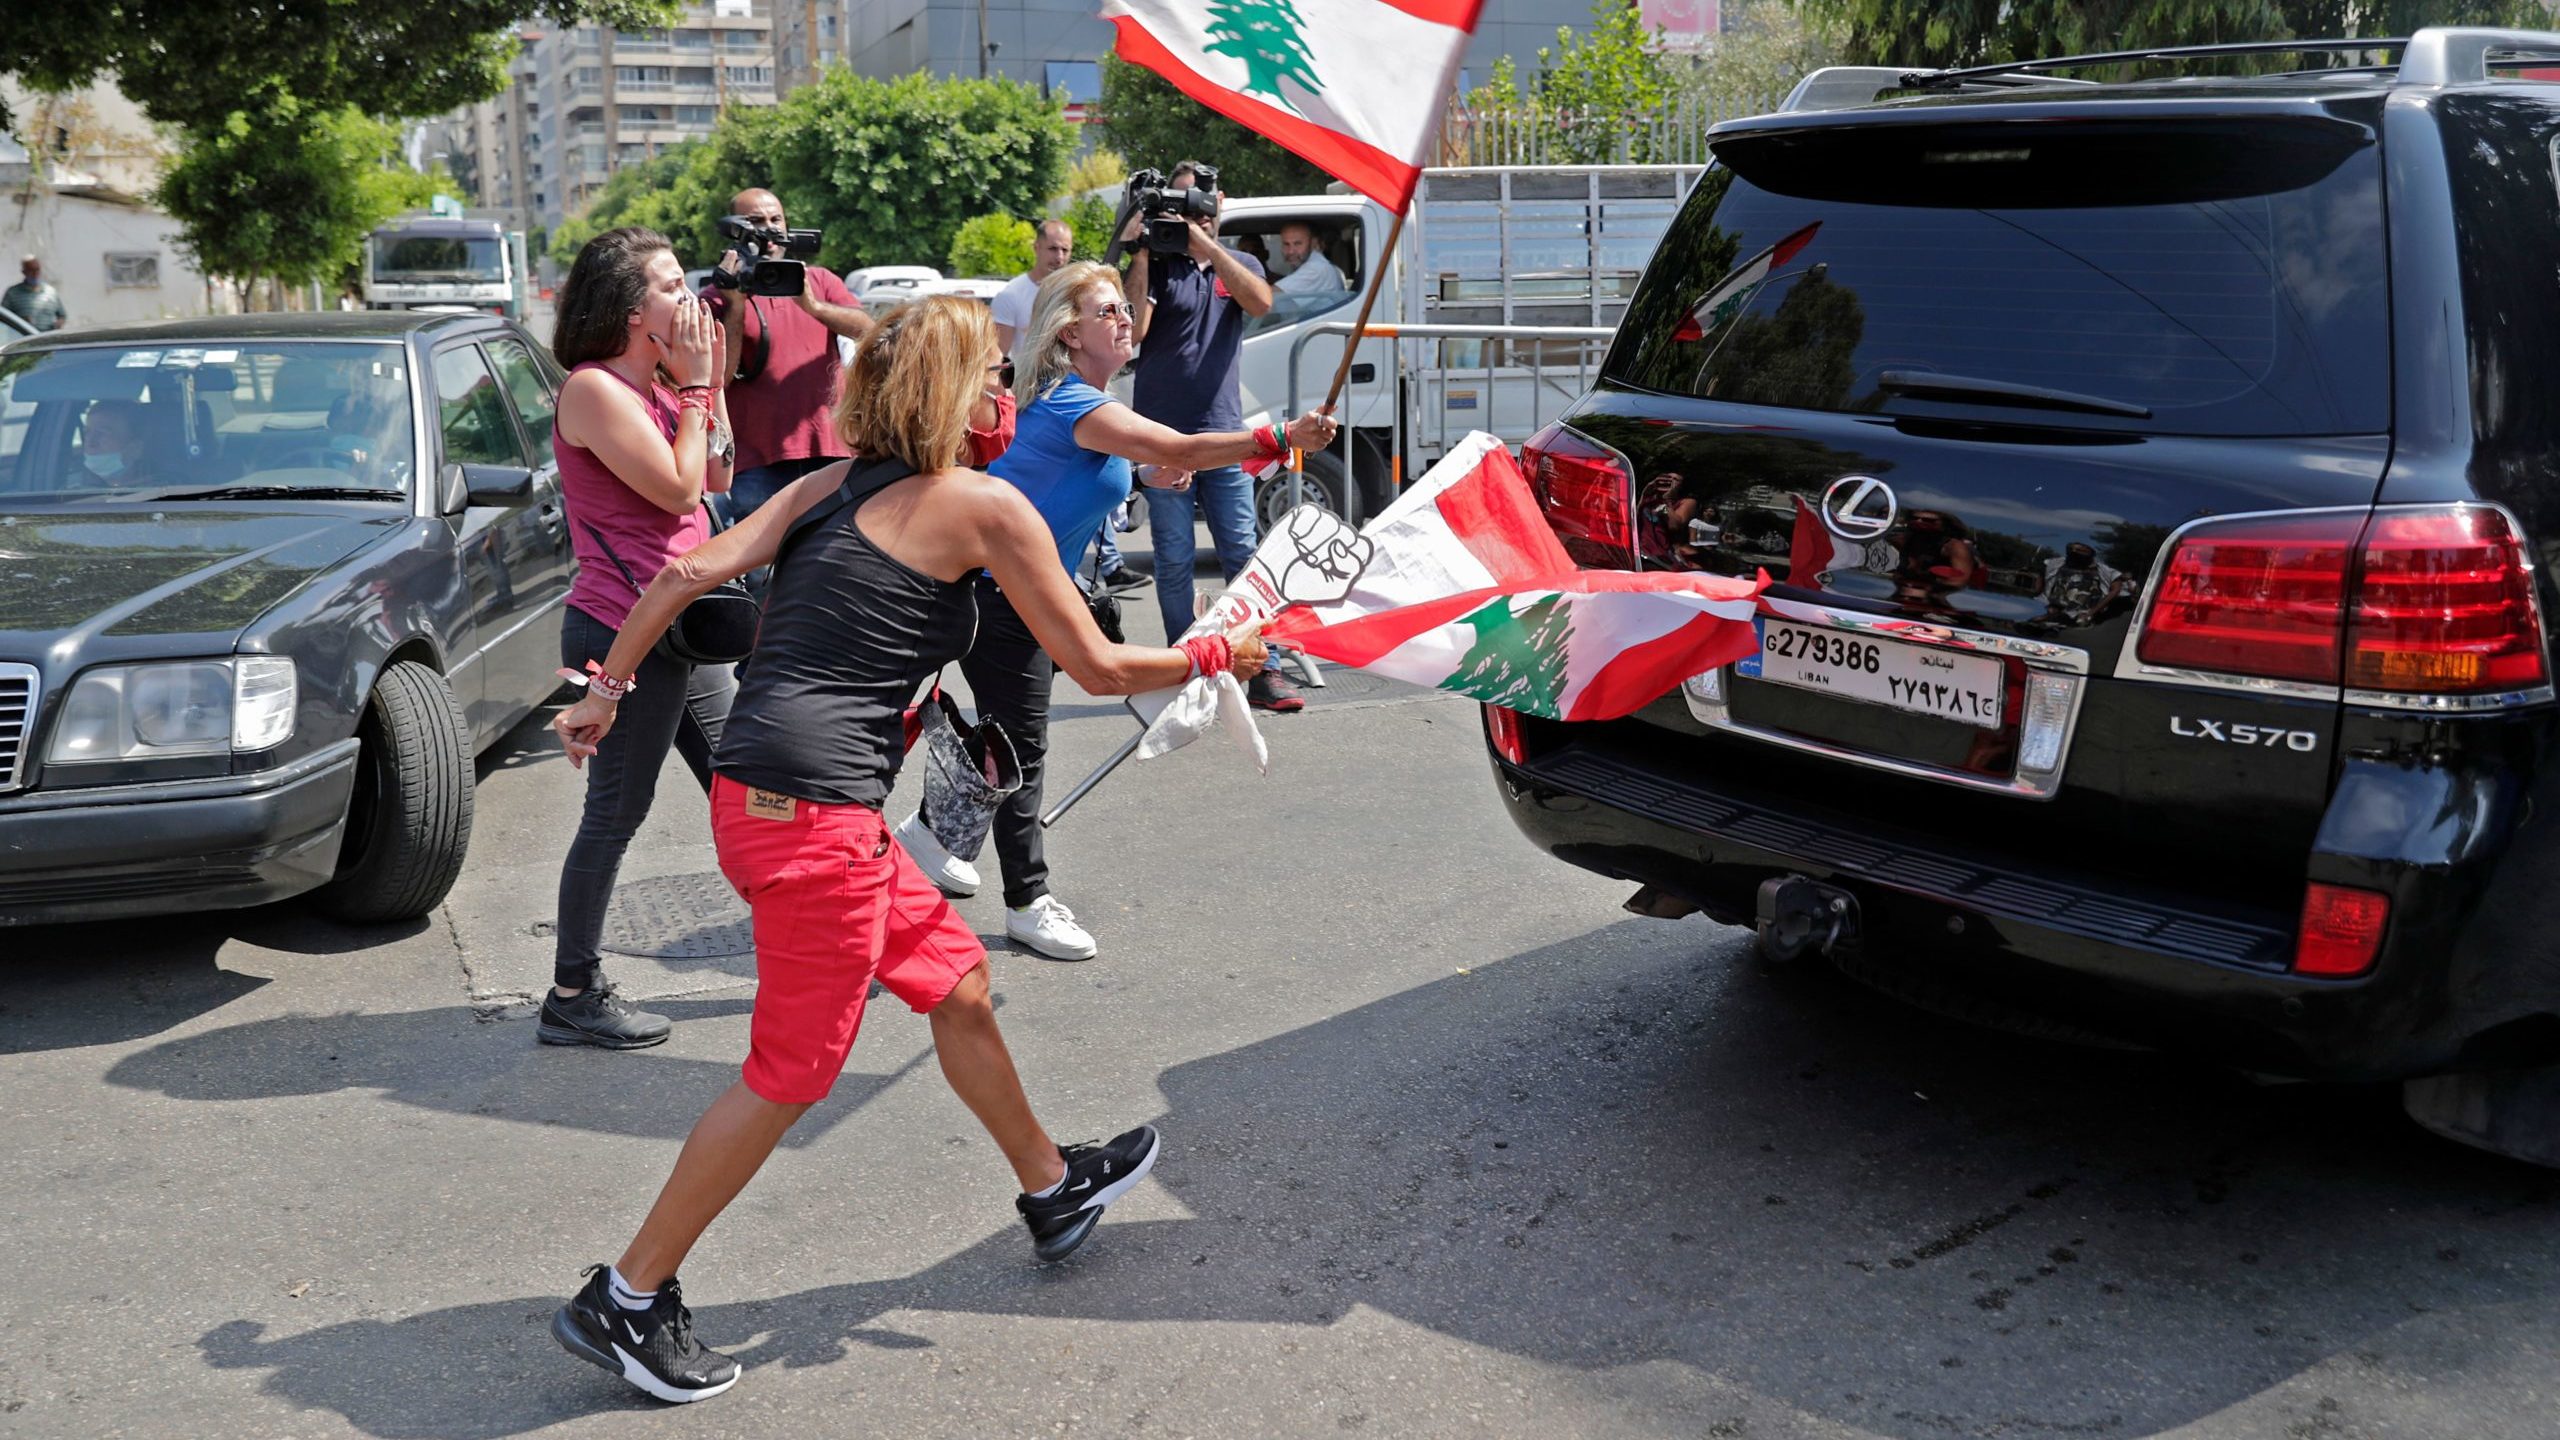 Lebanese Parliament Affirms Post-blast State of Emergency